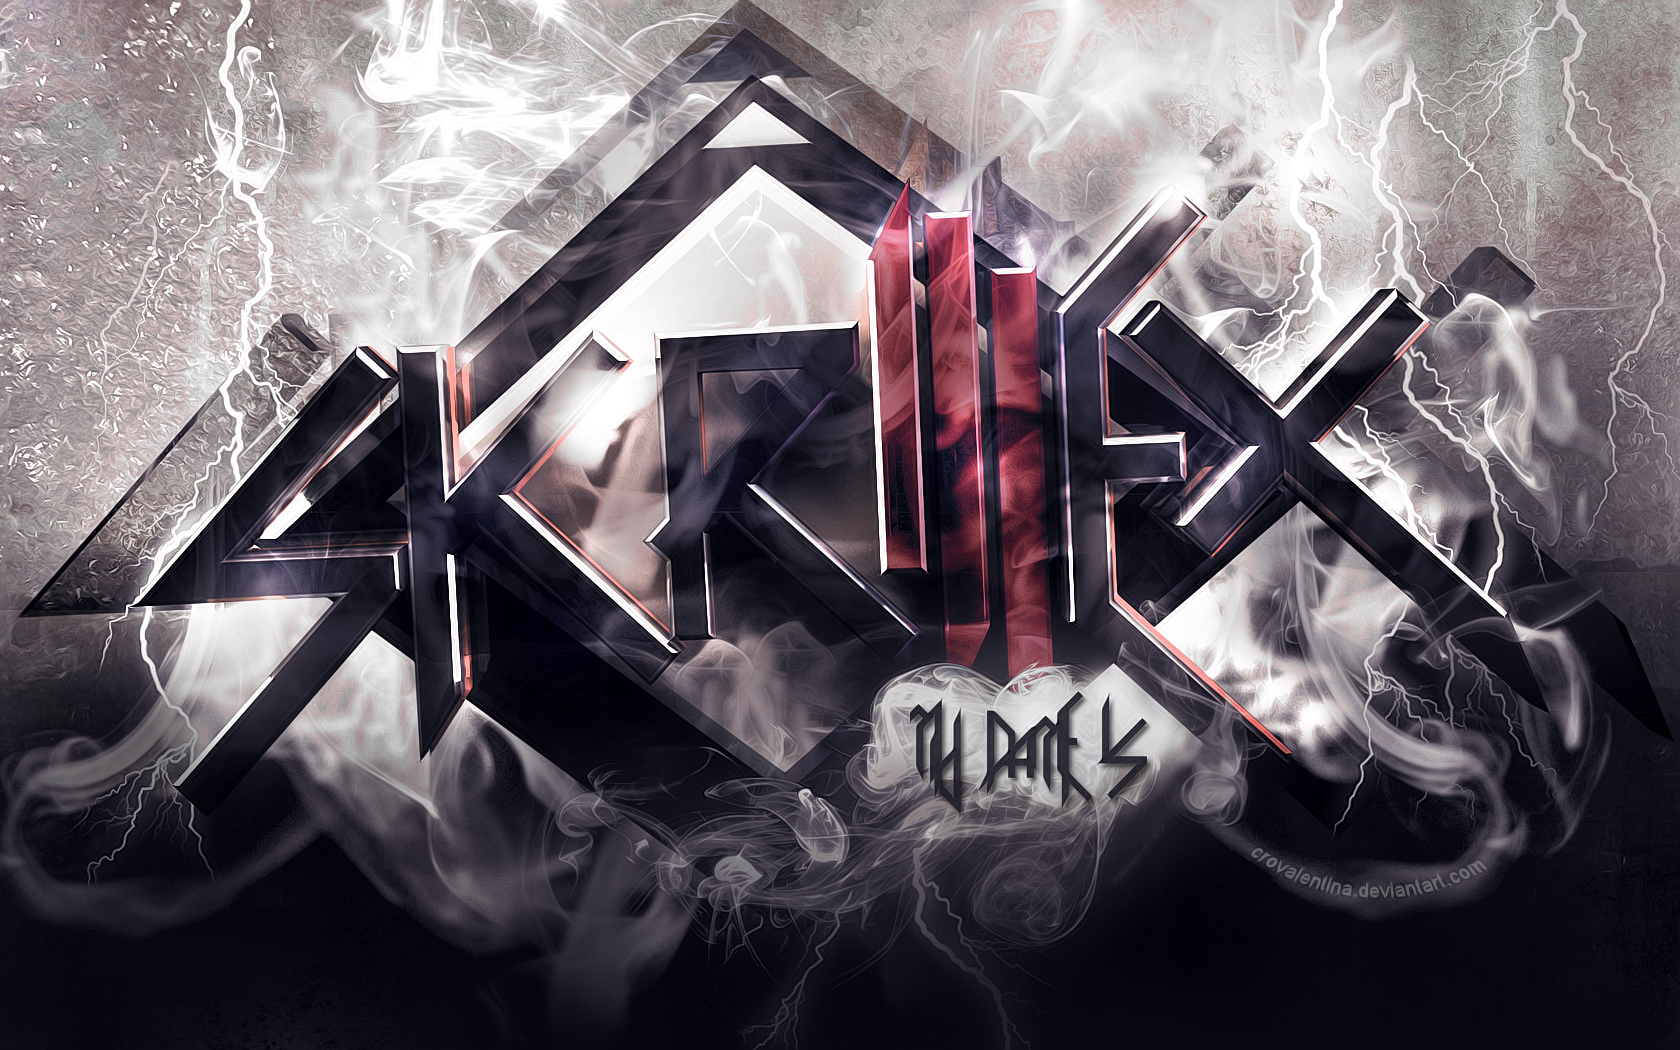 Skrillex Image My Name Is HD Wallpaper And